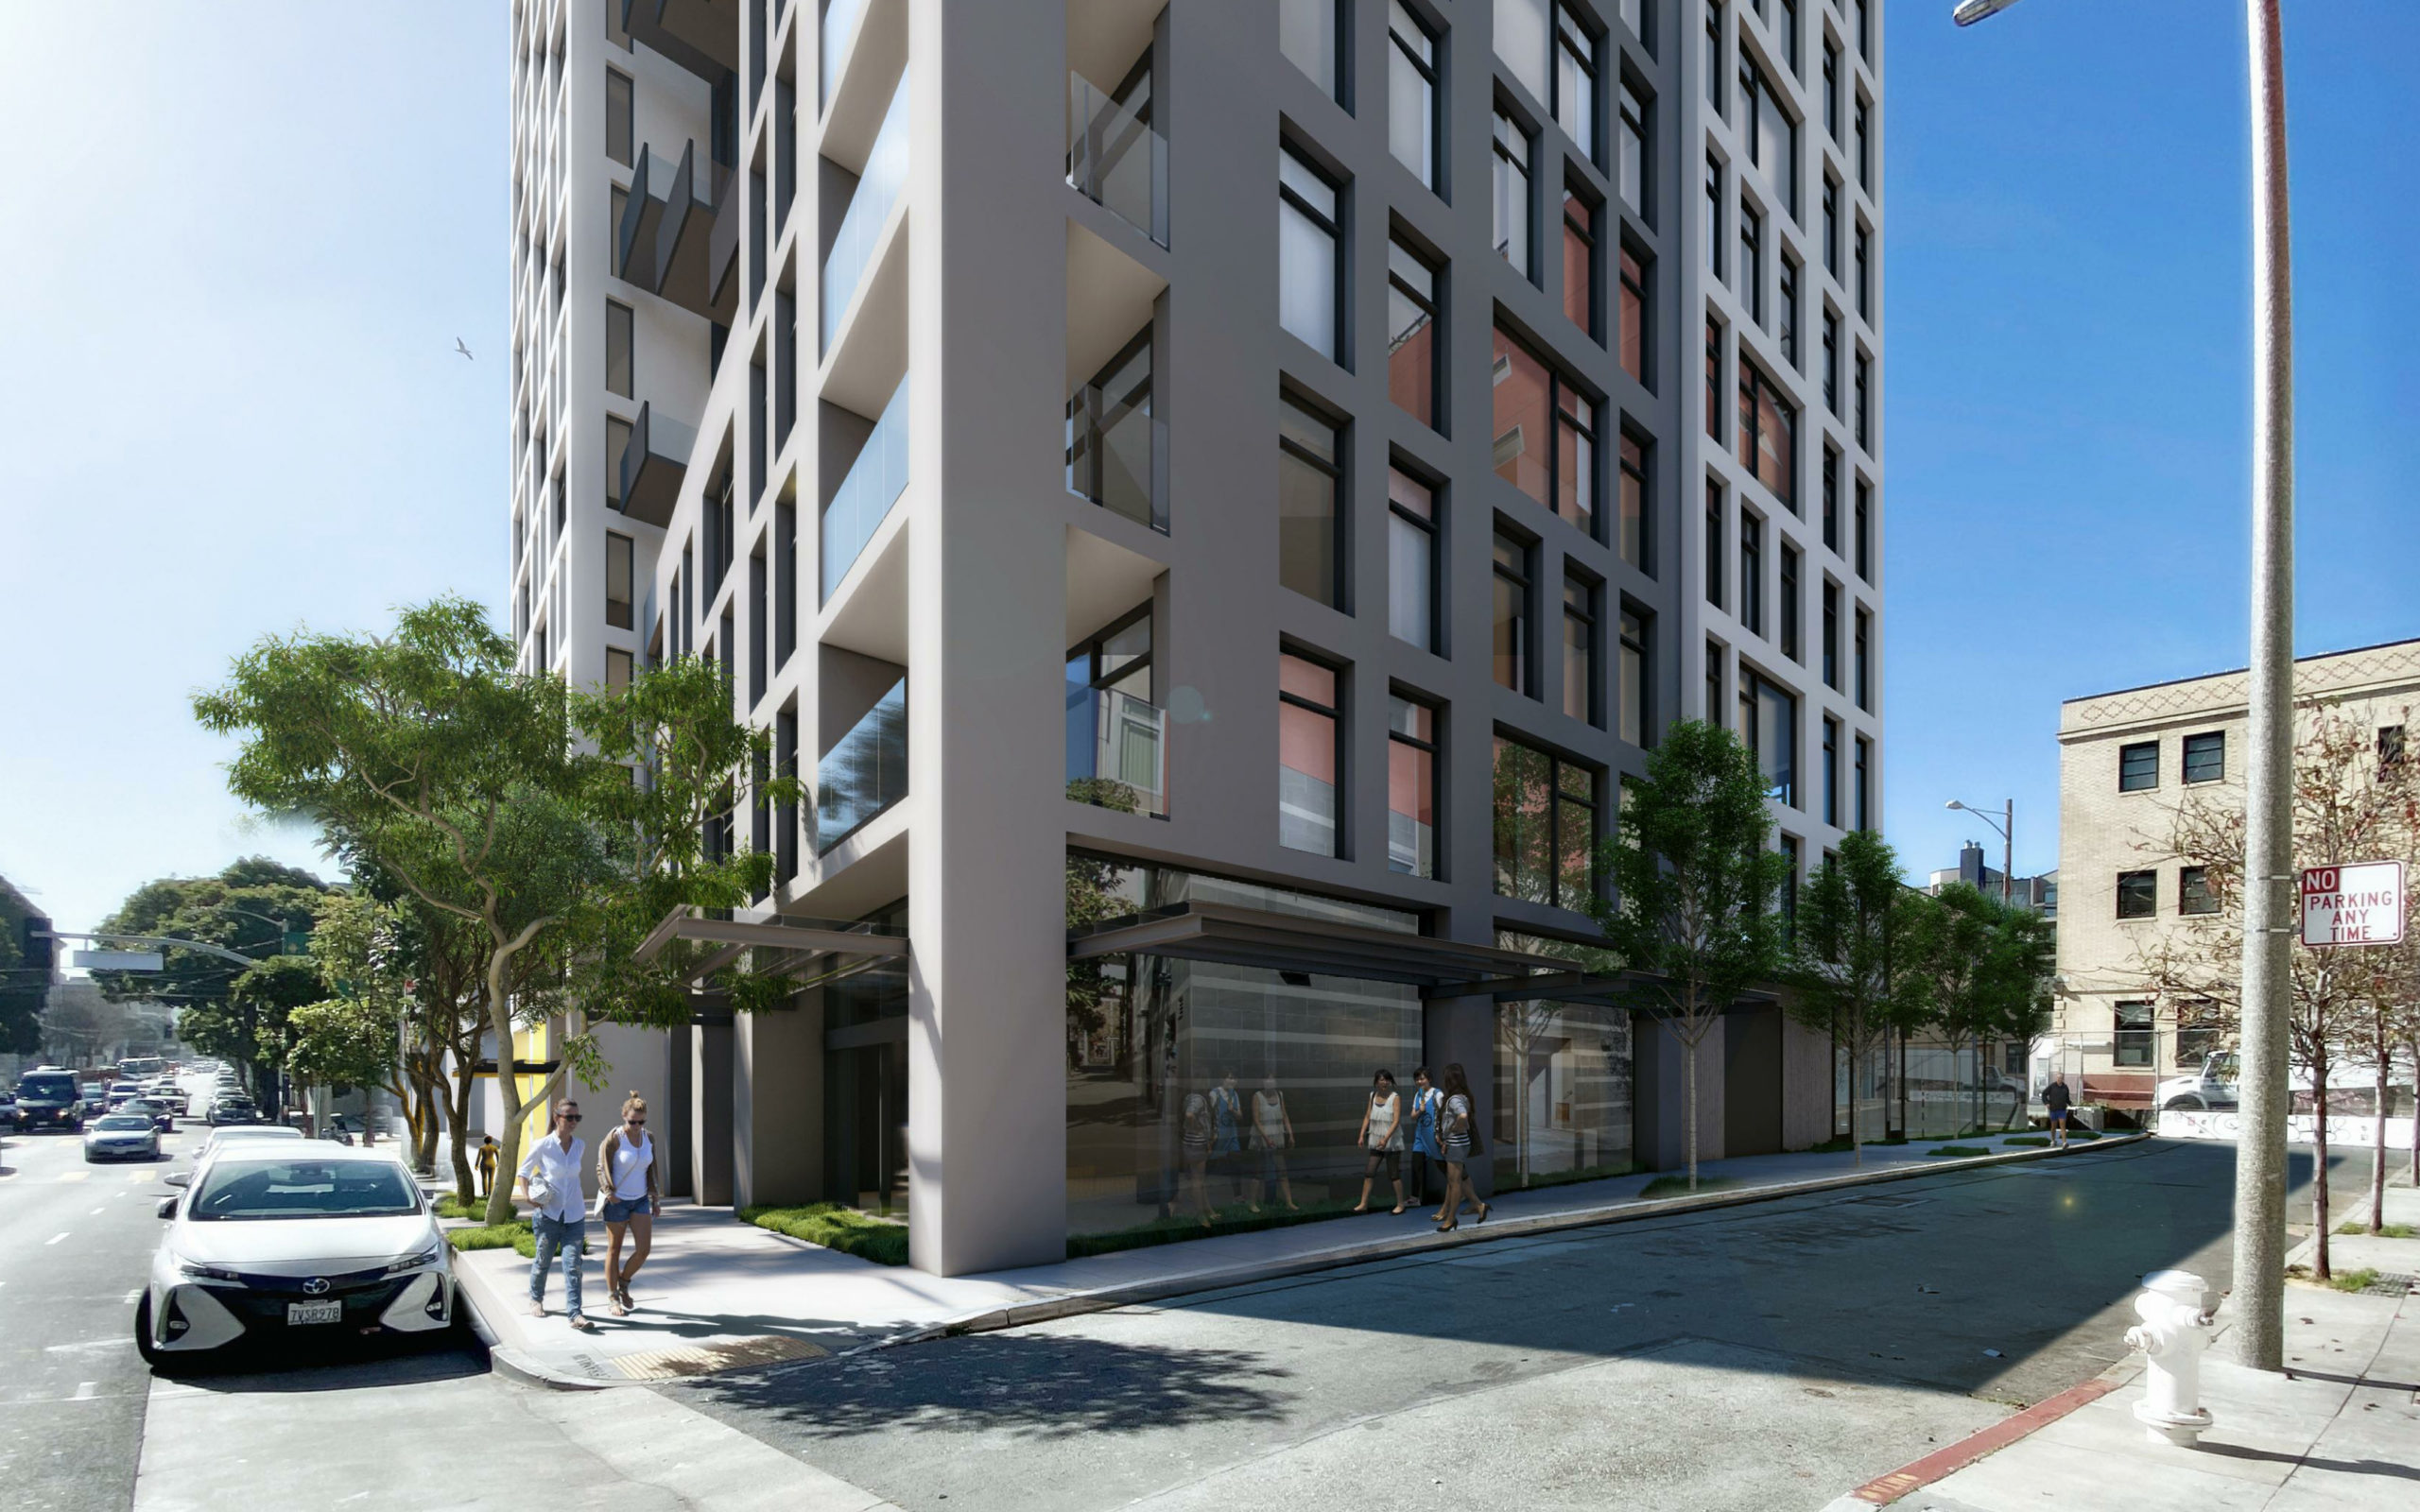 600 McAllister Street viewed from Franklin and Redwood, rendering by David Baker Architects